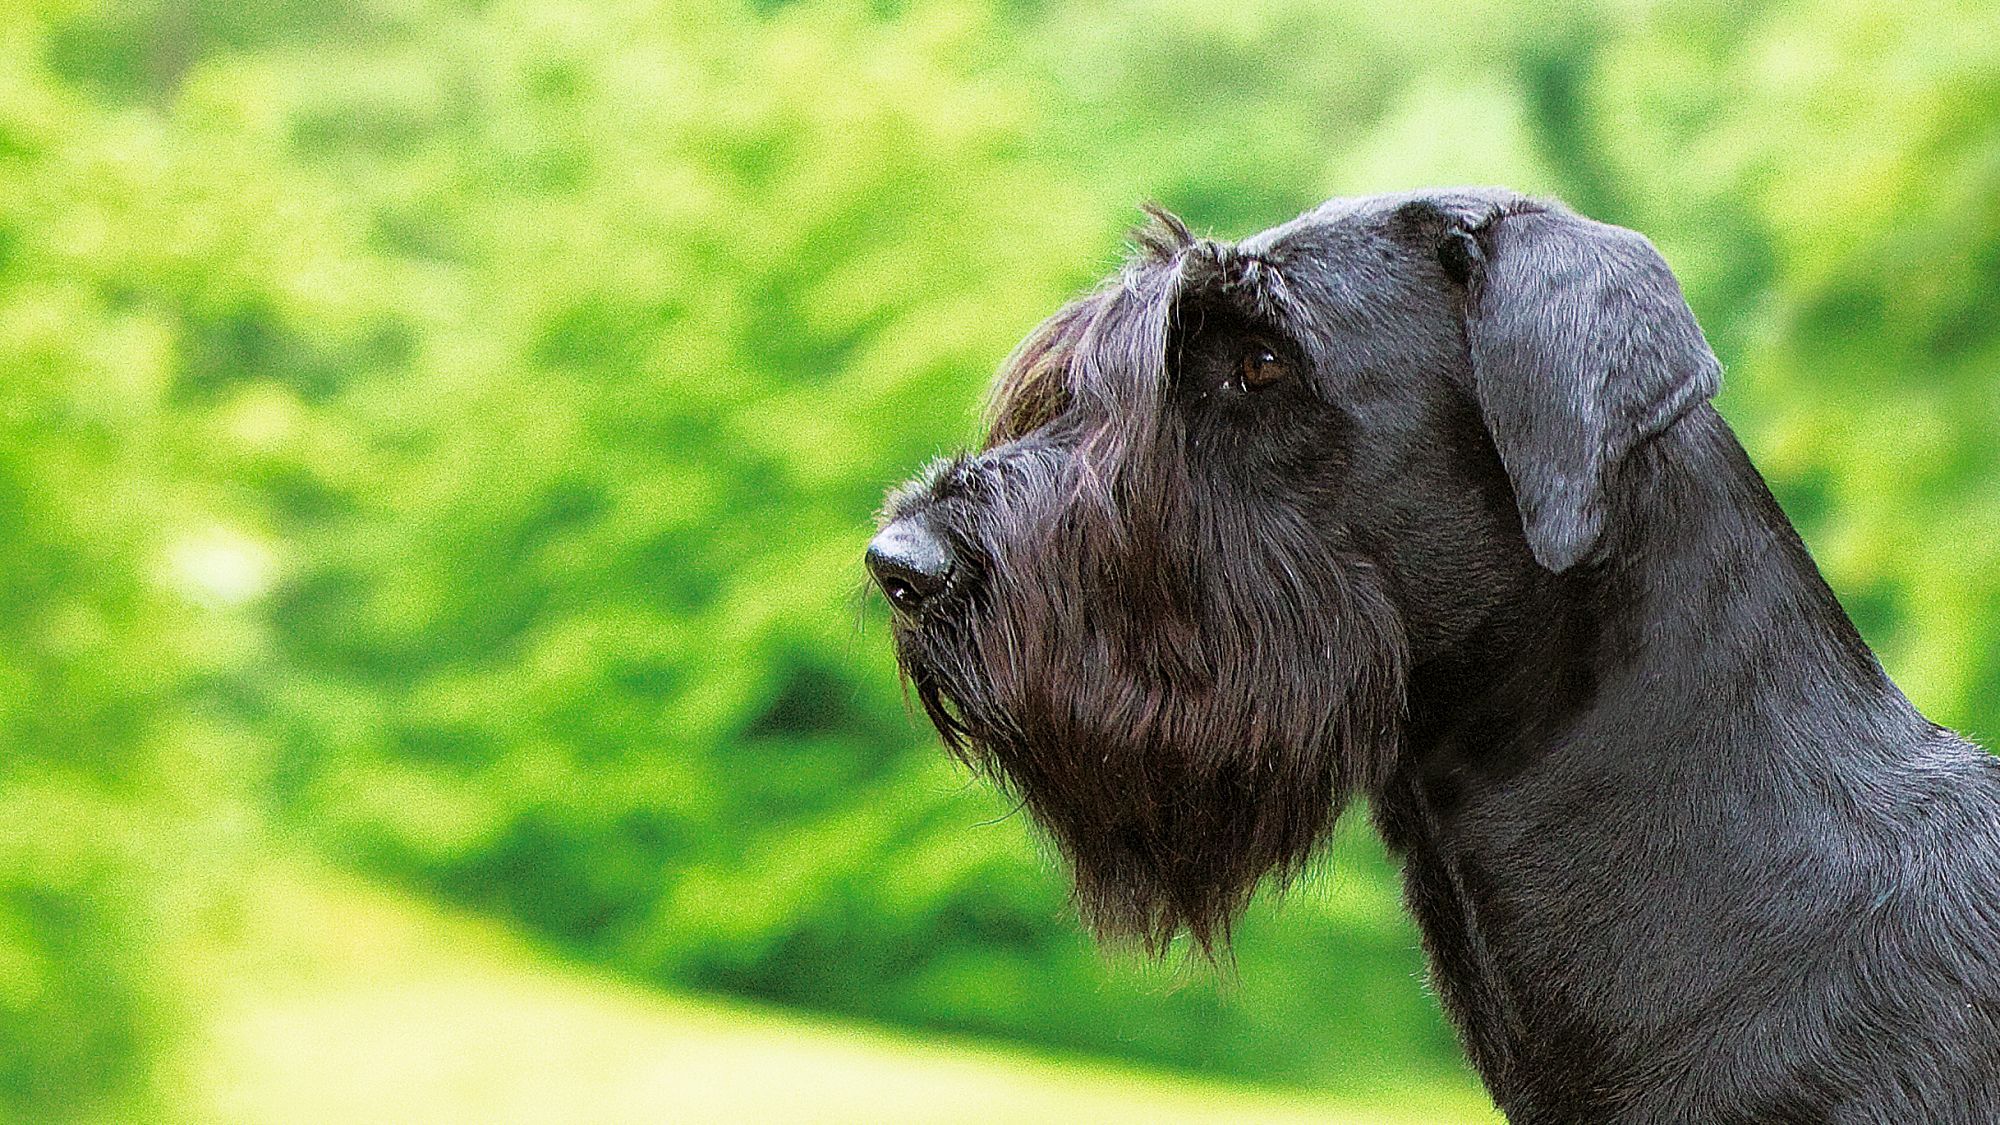 Side view close-up of of Giant Schnauzer